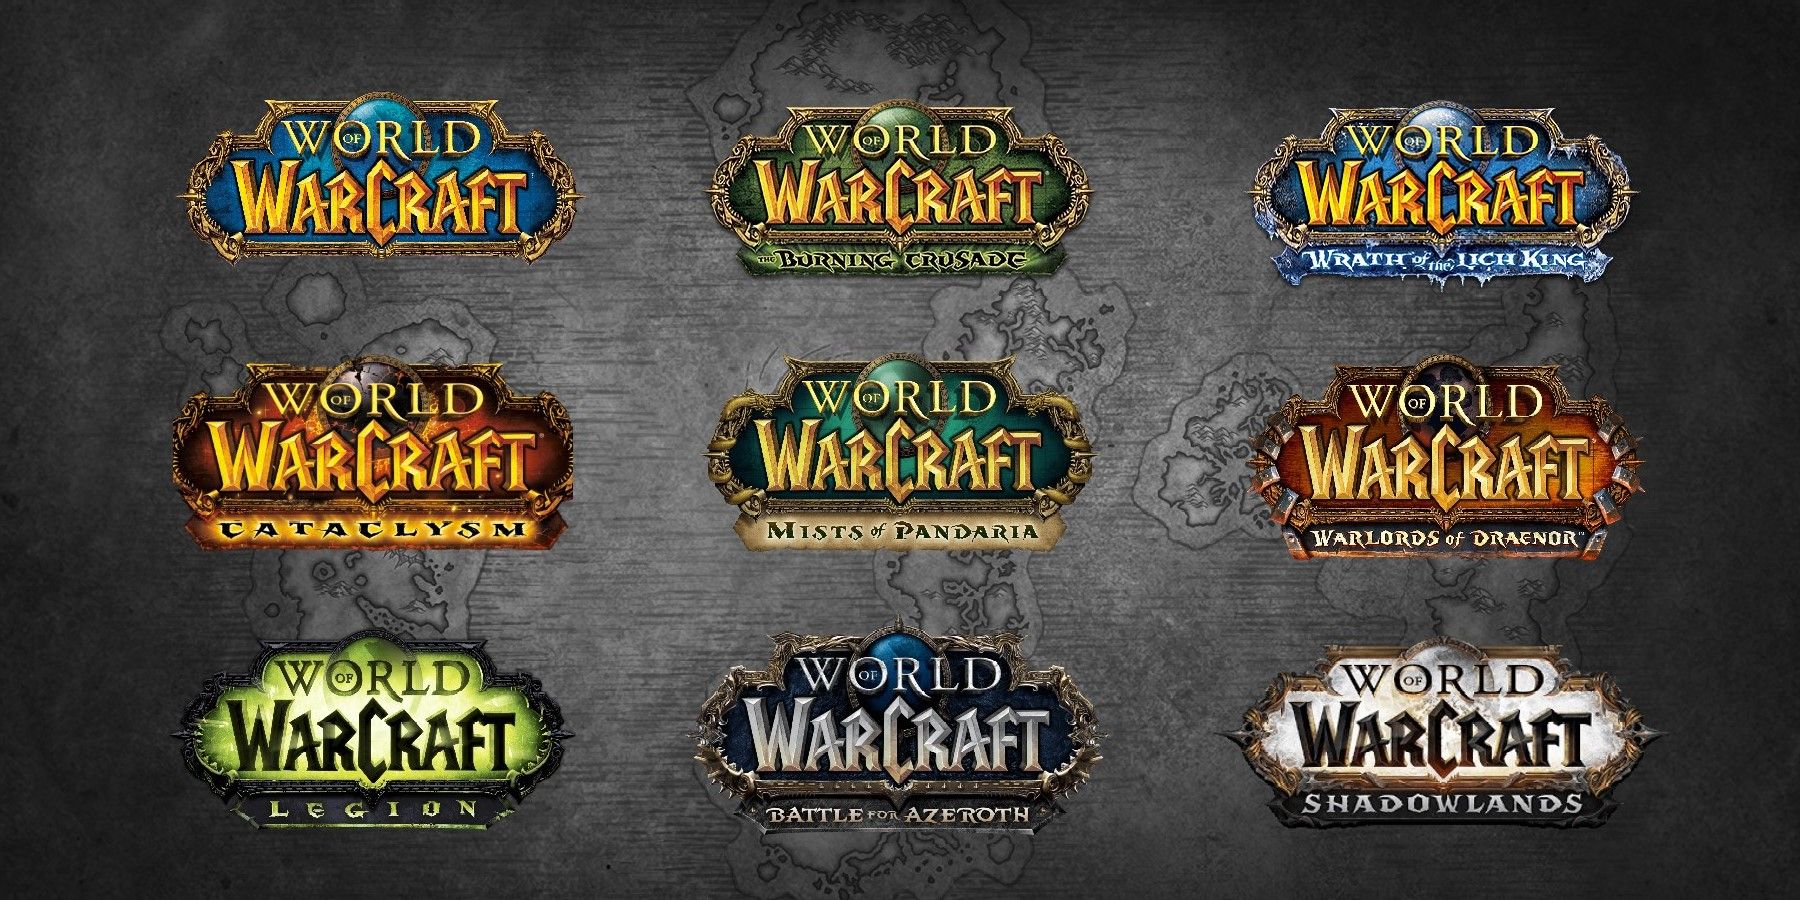 World of Warcraft to Announce Next Expansion Pack in April